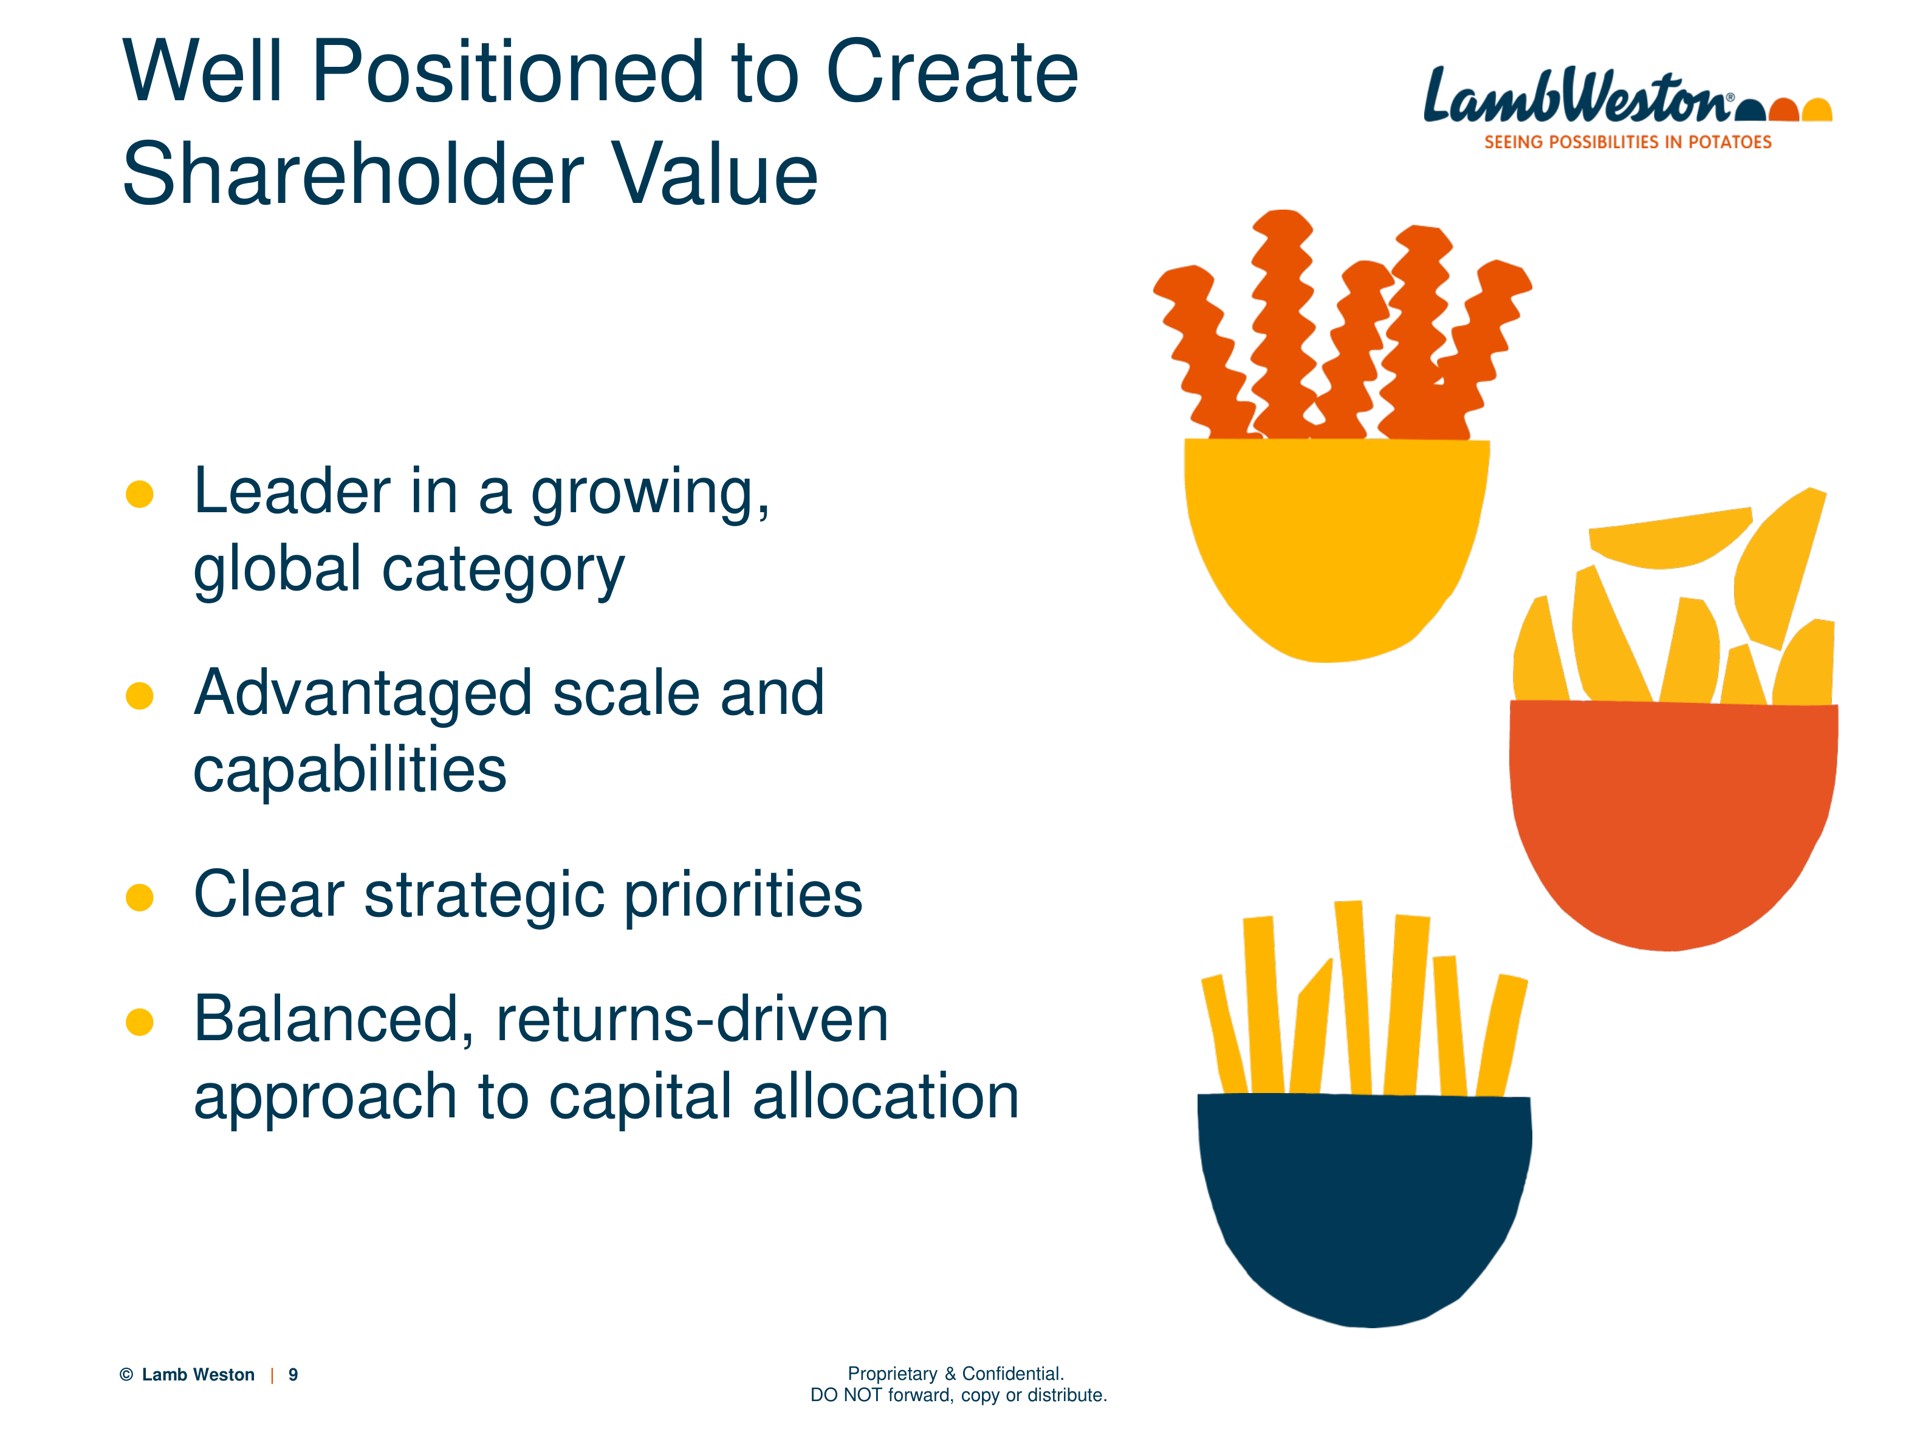 well positioned to create shareholder value | Lamb Weston